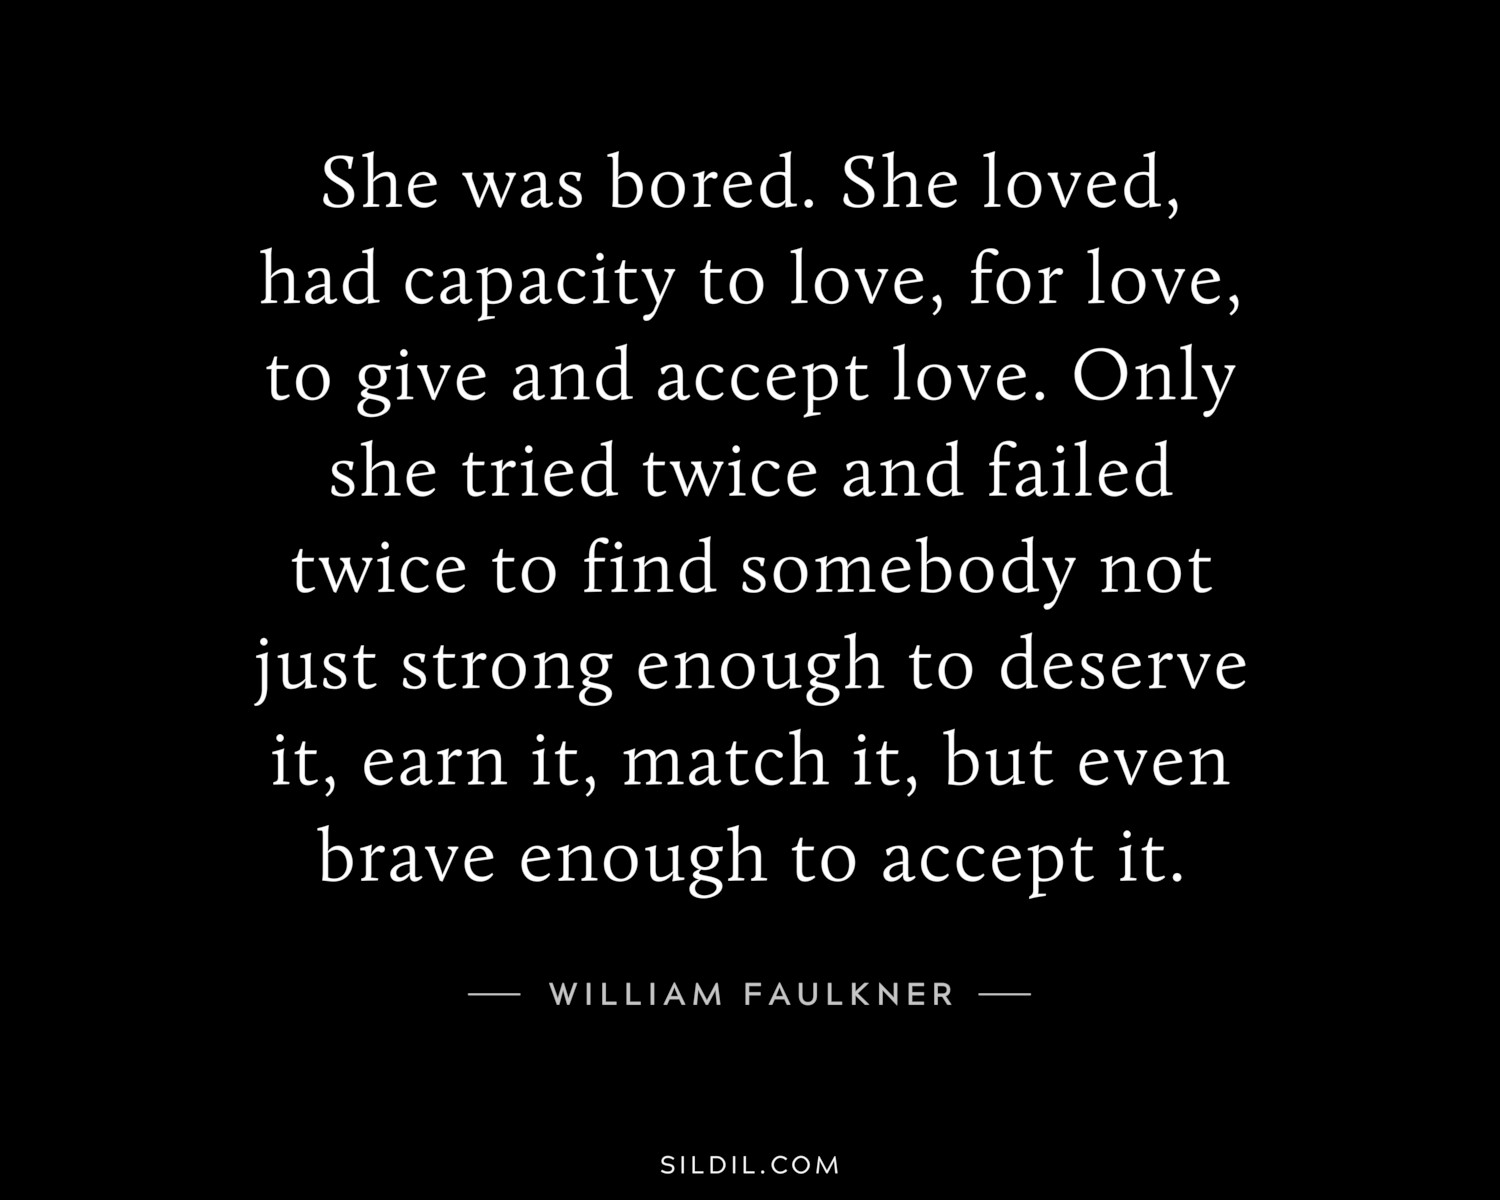 She was bored. She loved, had capacity to love, for love, to give and accept love. Only she tried twice and failed twice to find somebody not just strong enough to deserve it, earn it, match it, but even brave enough to accept it.